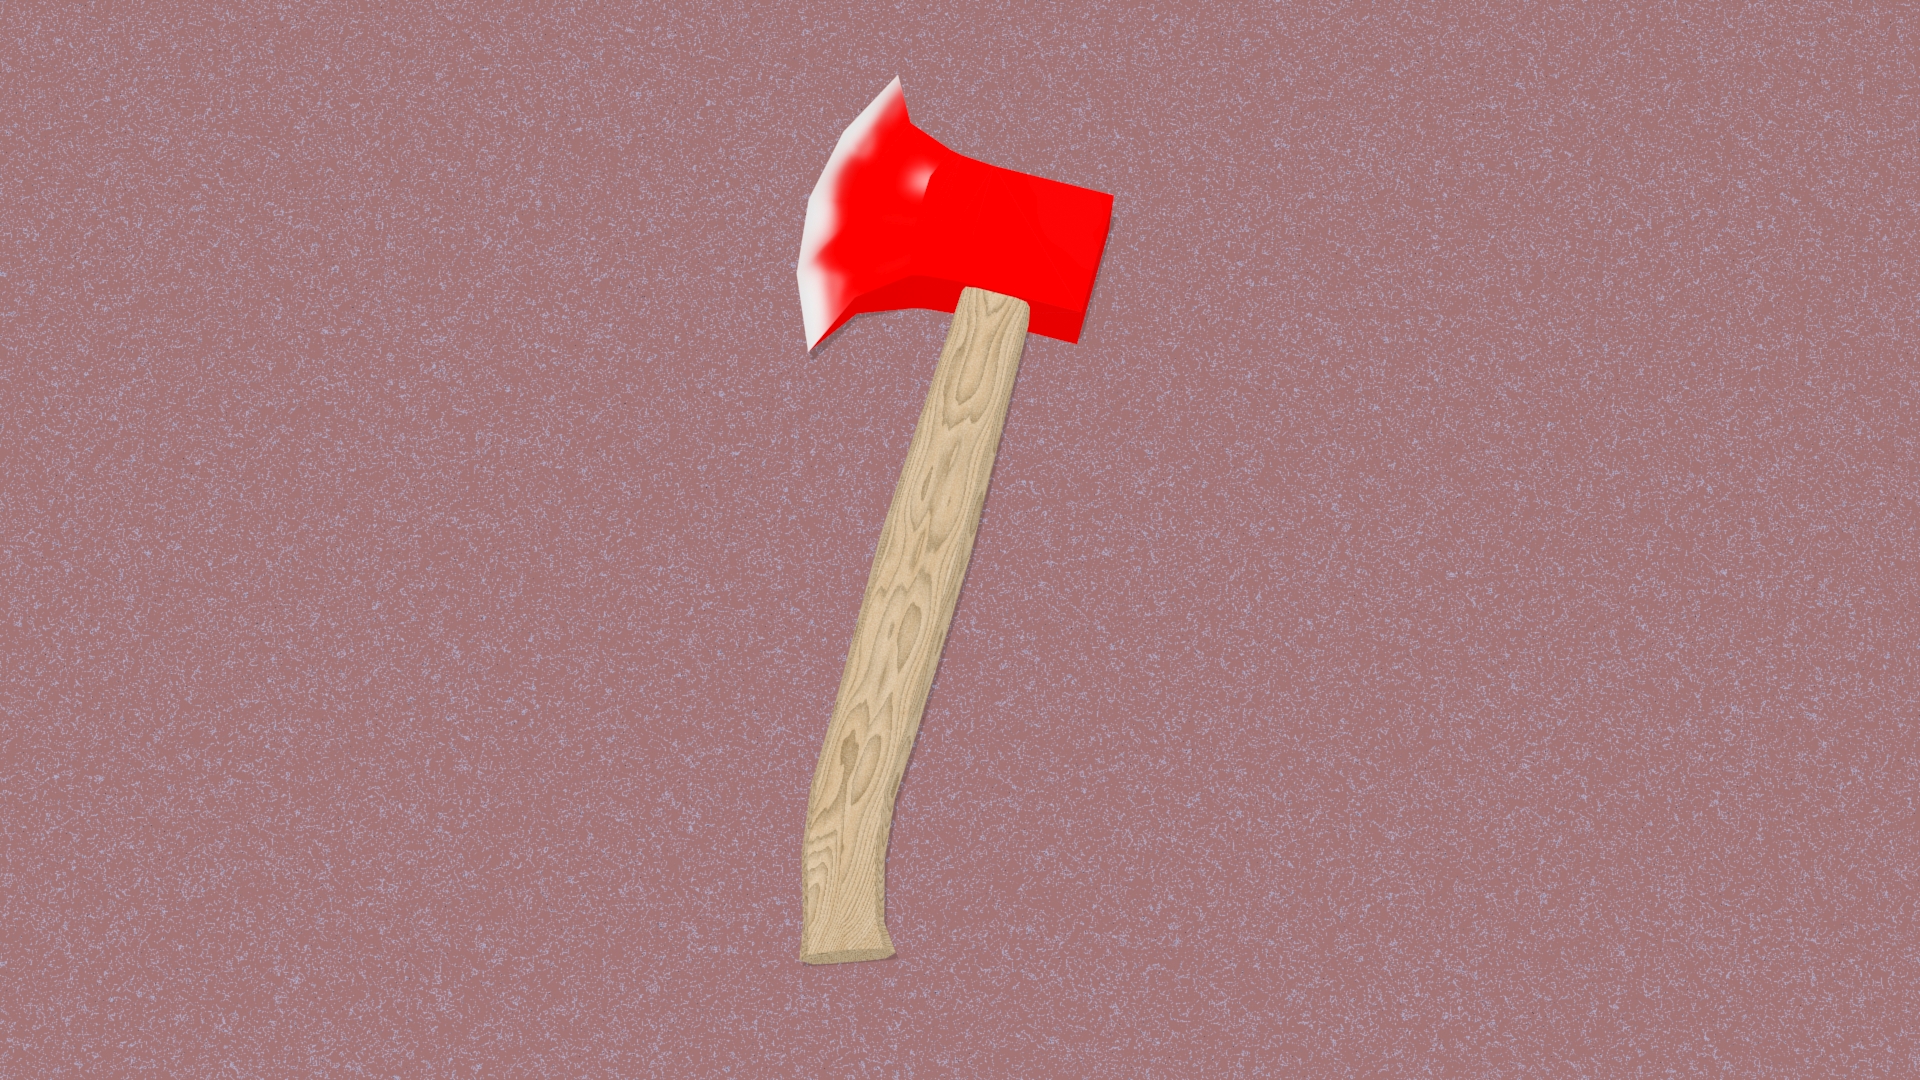 3D rendered axe with a wood handle.